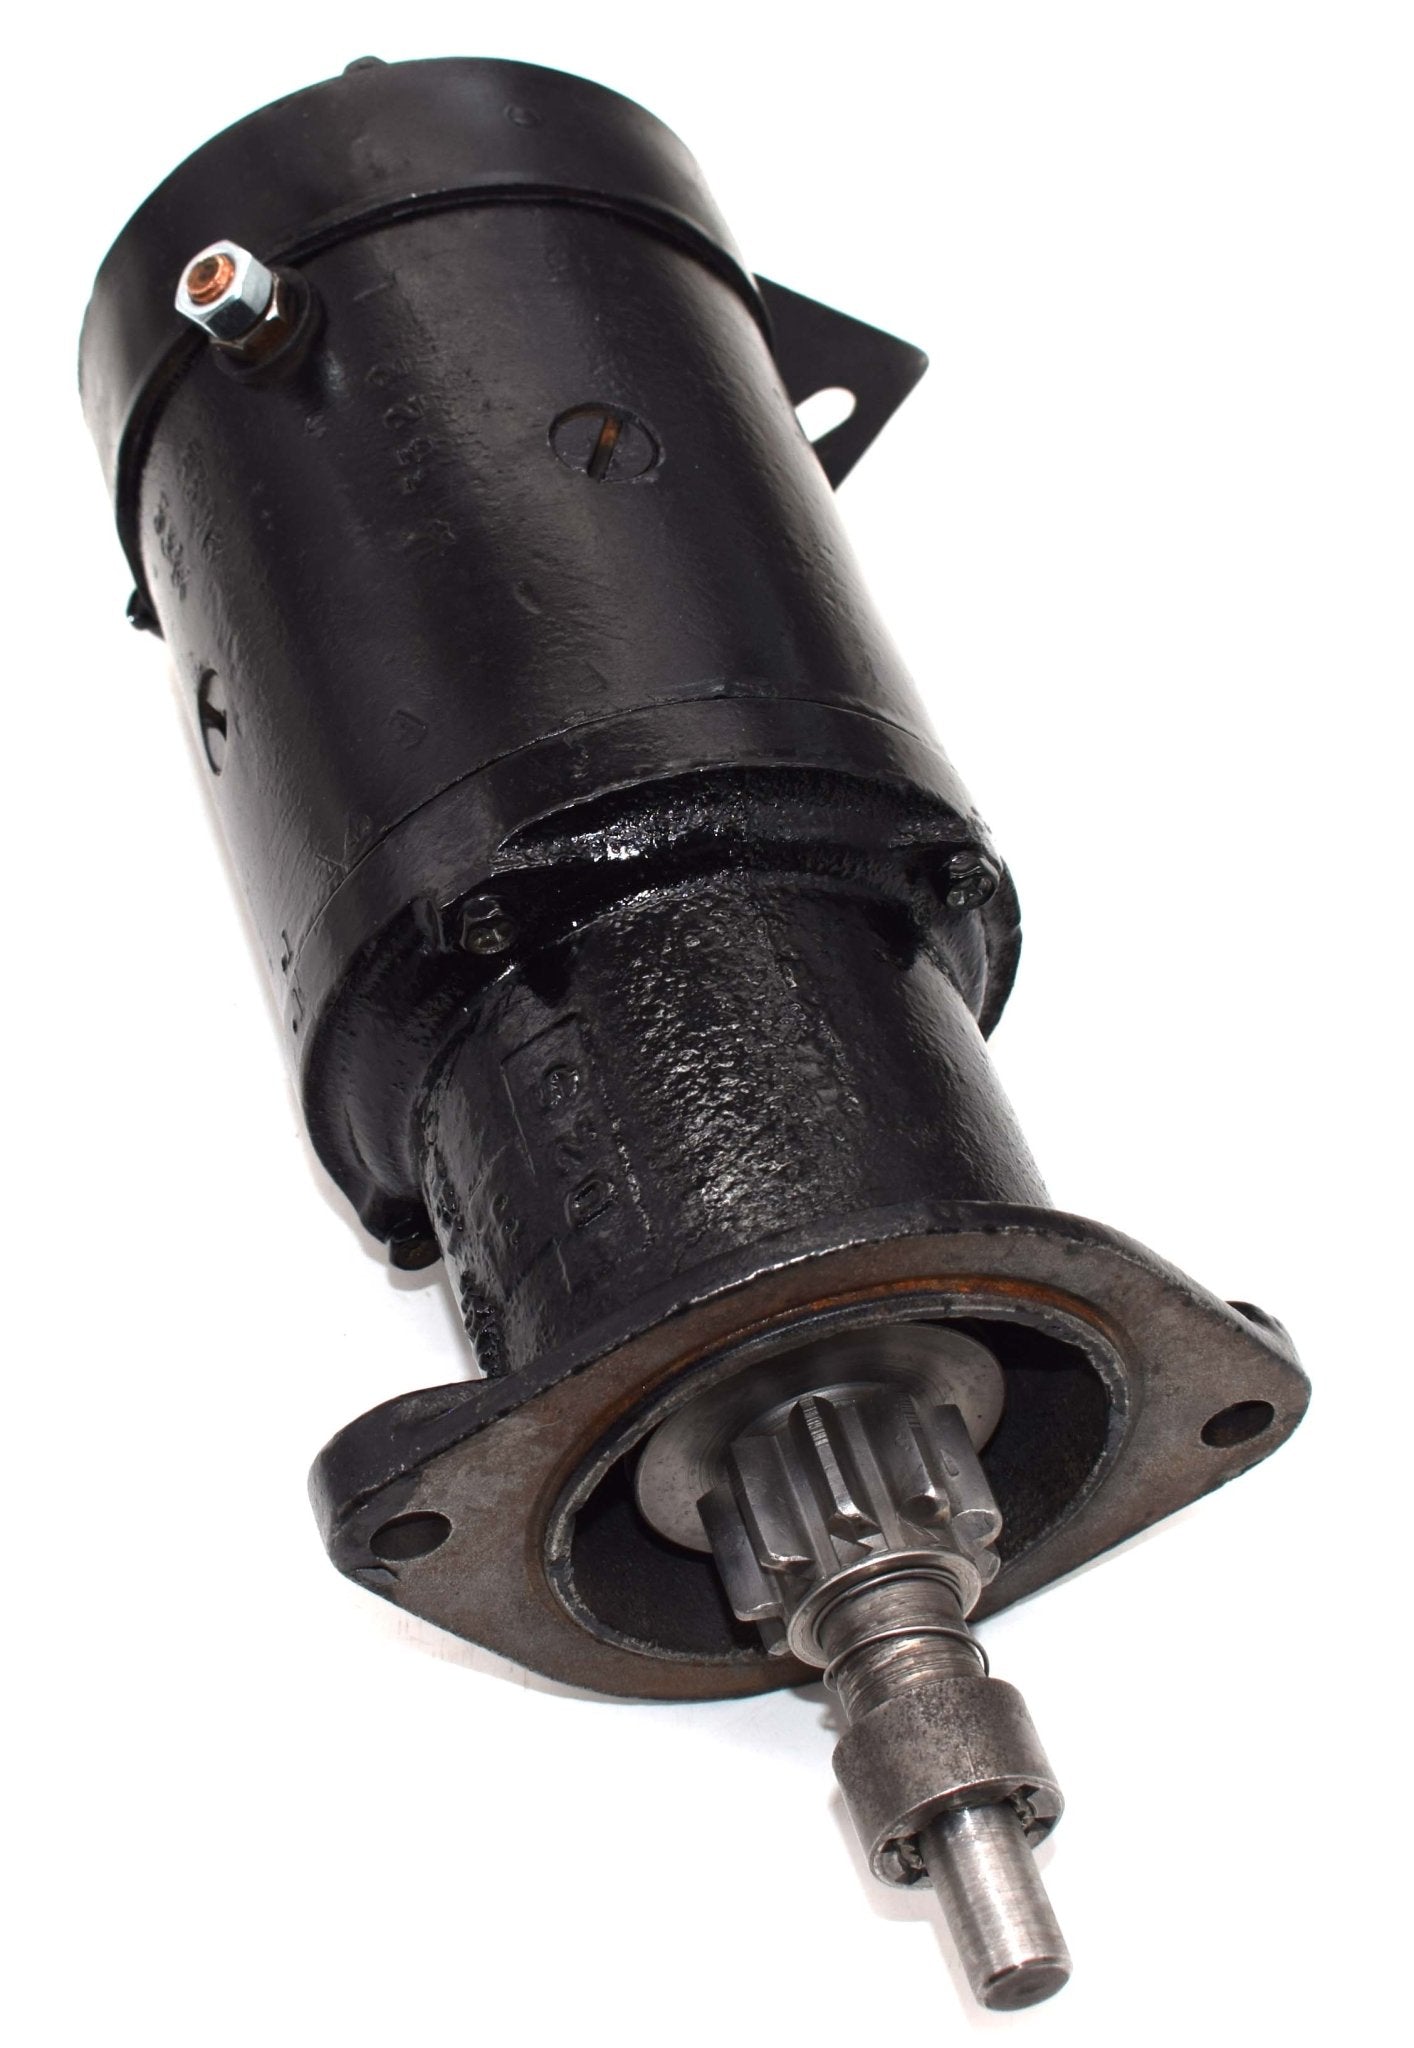 Starter Rebuild Service, 12 Volt or 6 Volt, 1941-1966, Willys and Jeep Vehicles - The JeepsterMan